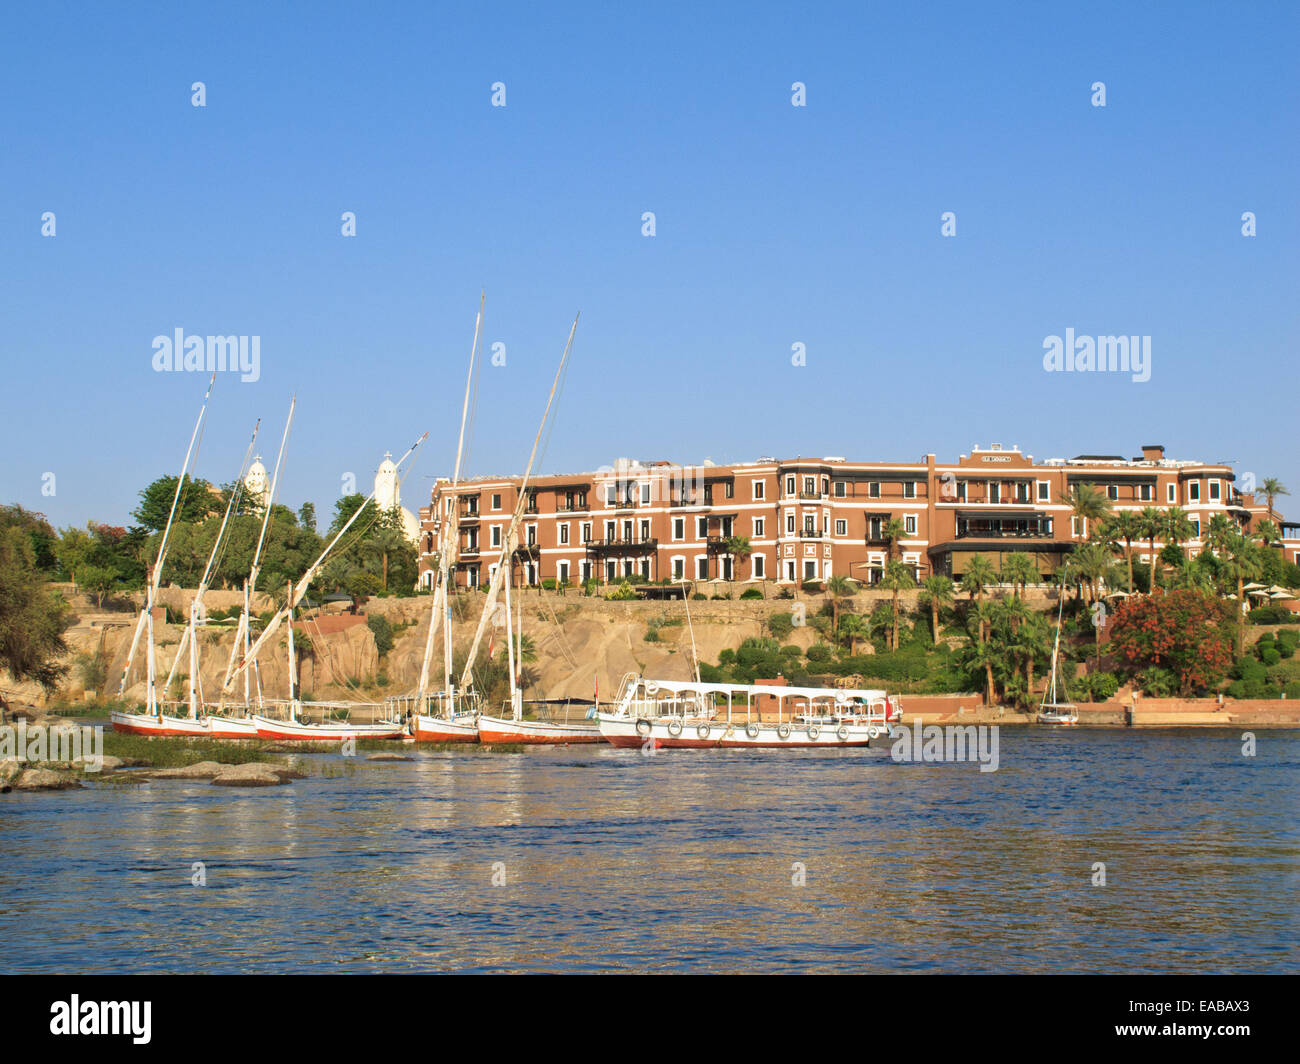 The legendary Old Cataract at the bank of Nile River, Aswan Stock Photo